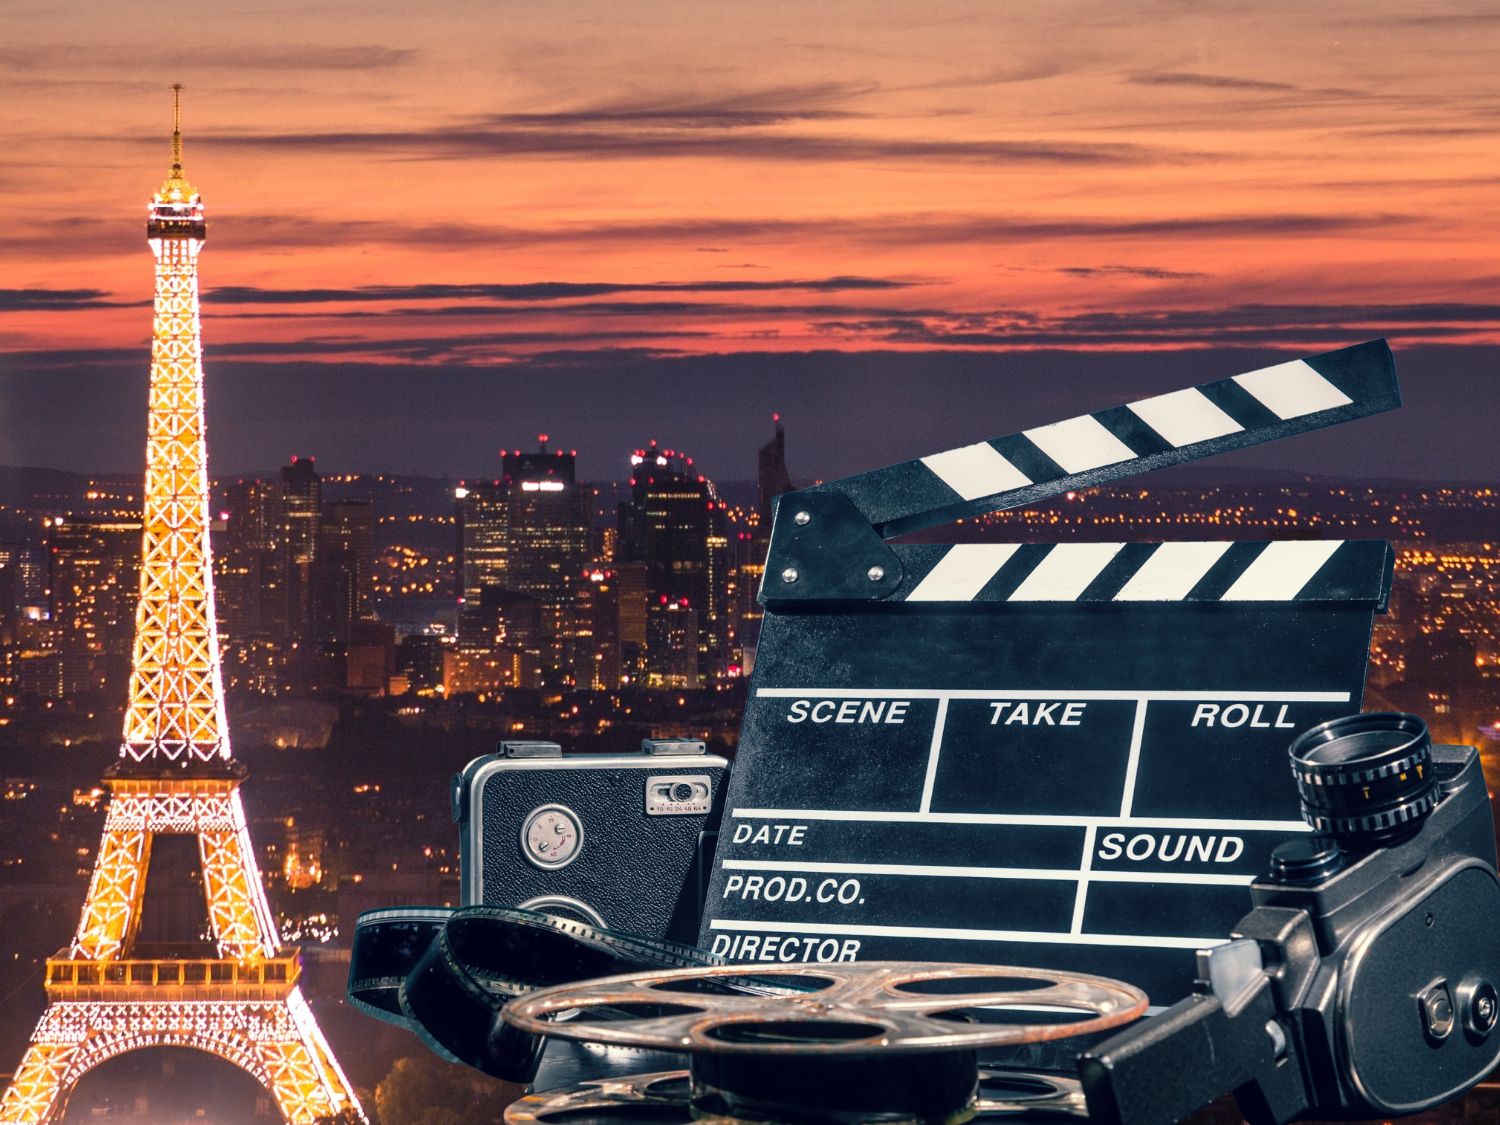 20 Extraordinary Movies Set In Paris That Will Inspire You To Visit!